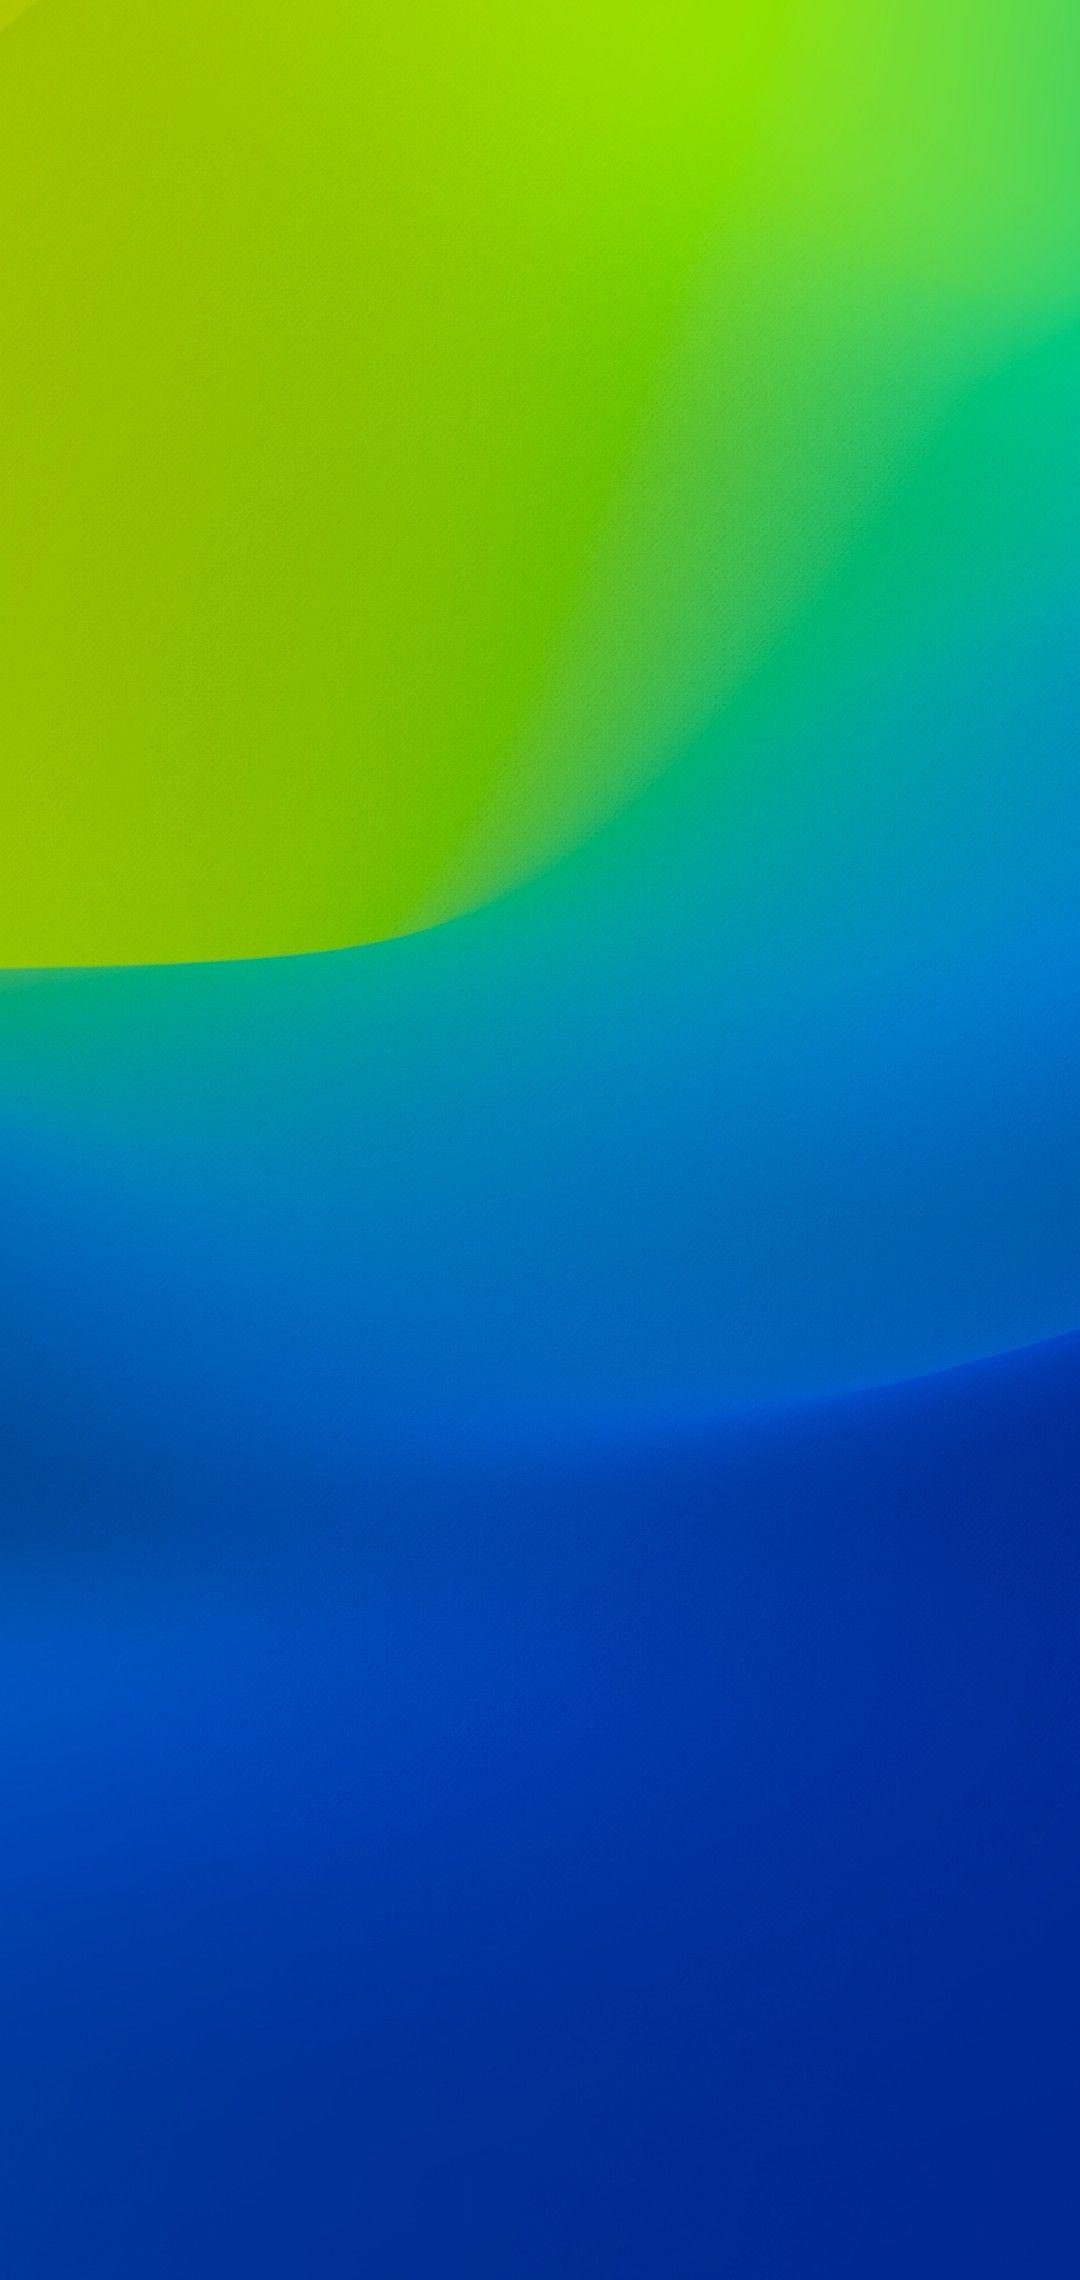 iOS iPhone X, blue, green, clean, simple, abstract, apple